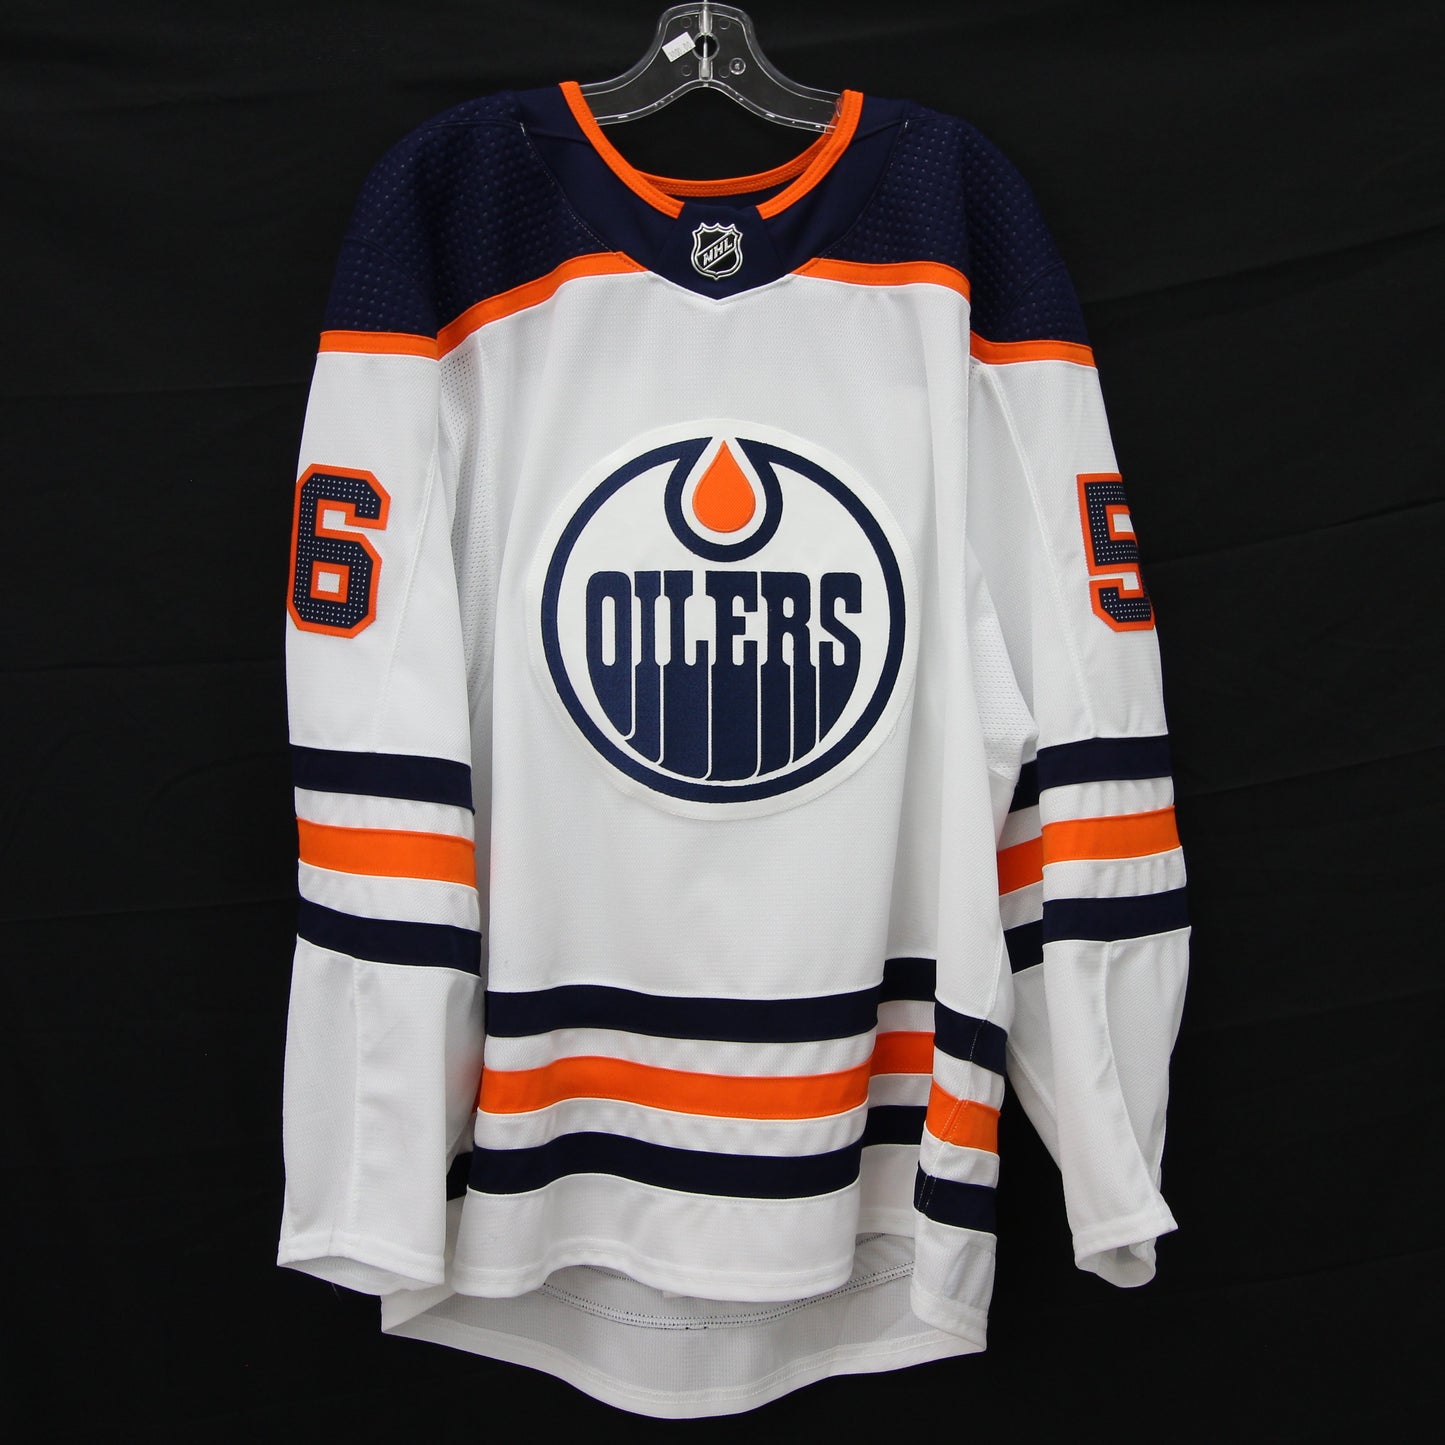 Kailer Yamamoto - Oilers - Autographed Jersey / Chandail autographié